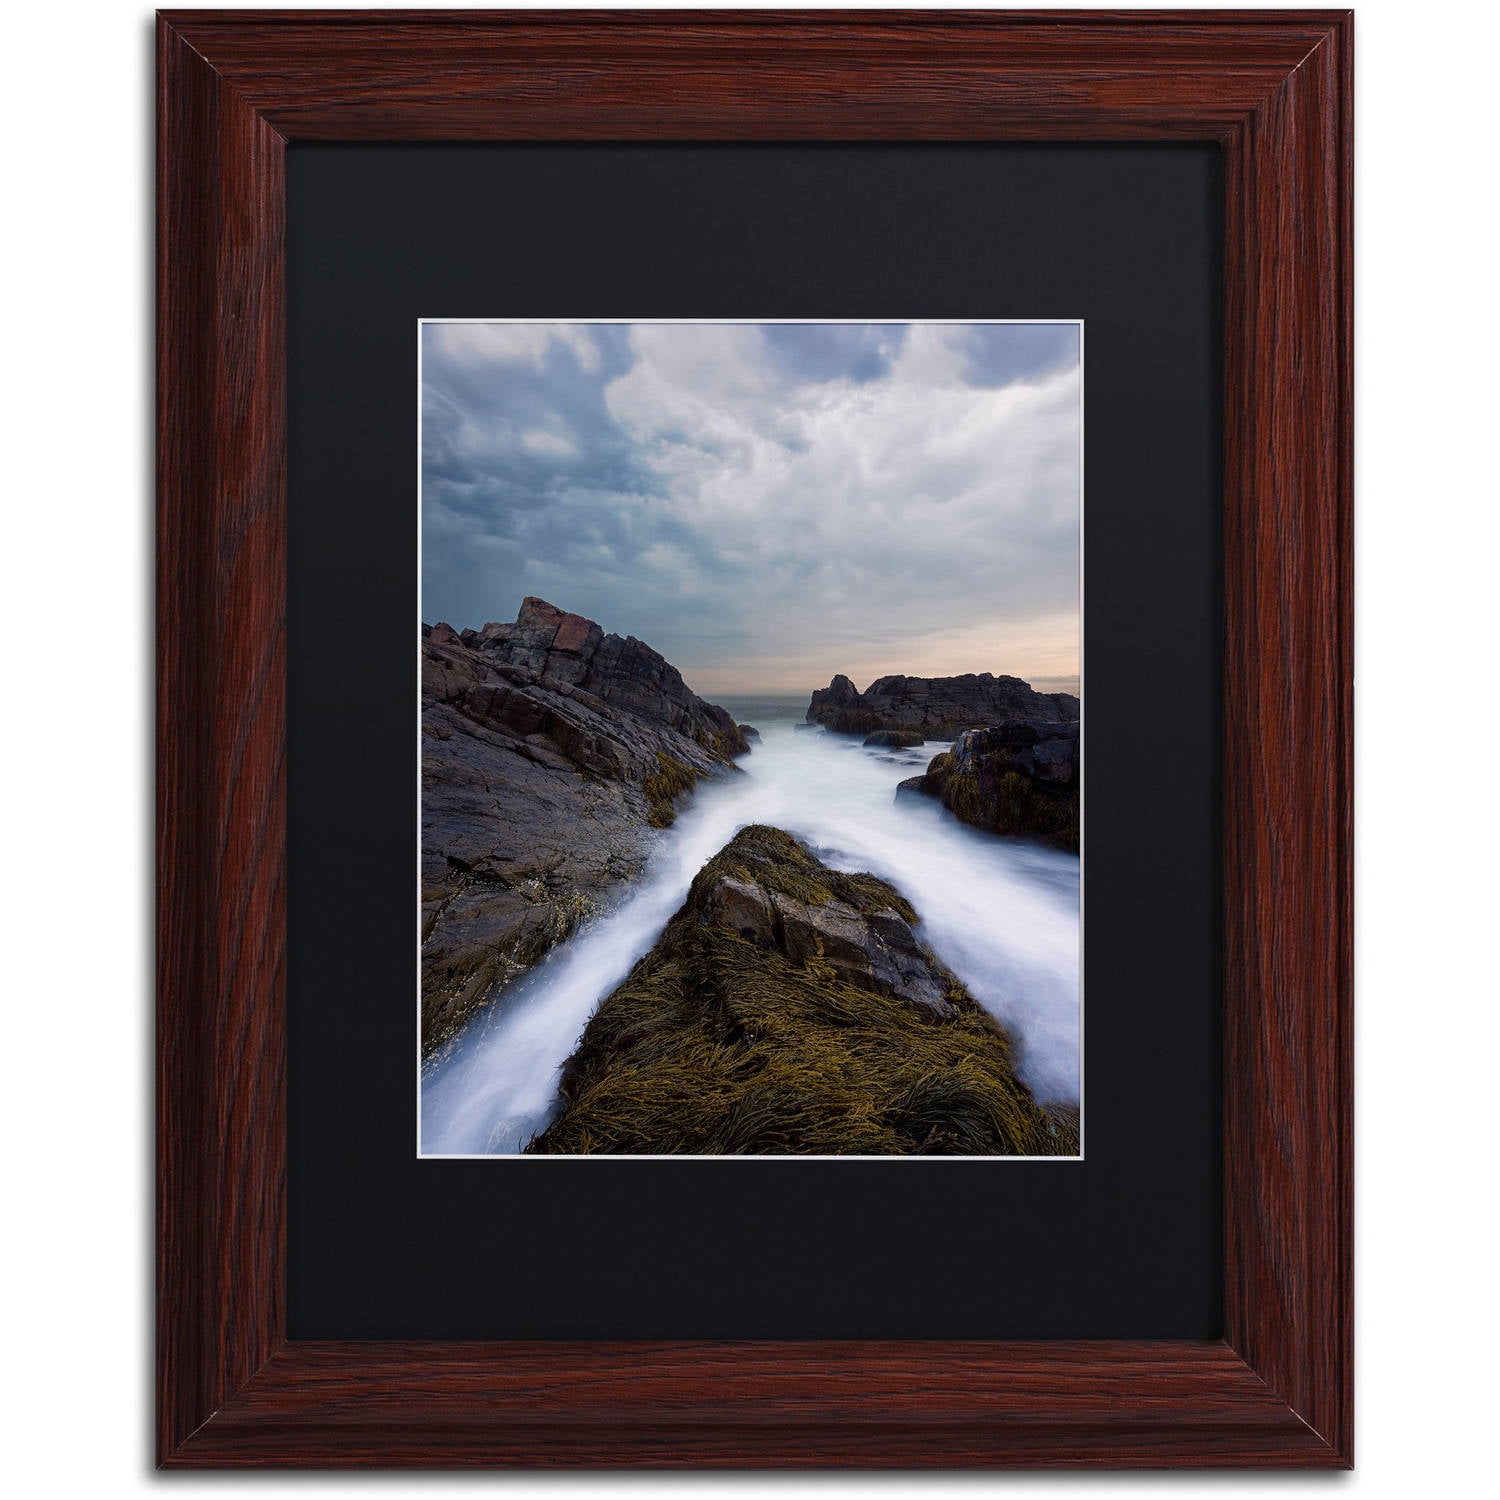 Wall Décor 16 x 20 Room Décor Trademark Fine ArtOn the Rocks by Michael Blanchette Photography Artwork in Black Matte with Black Frame